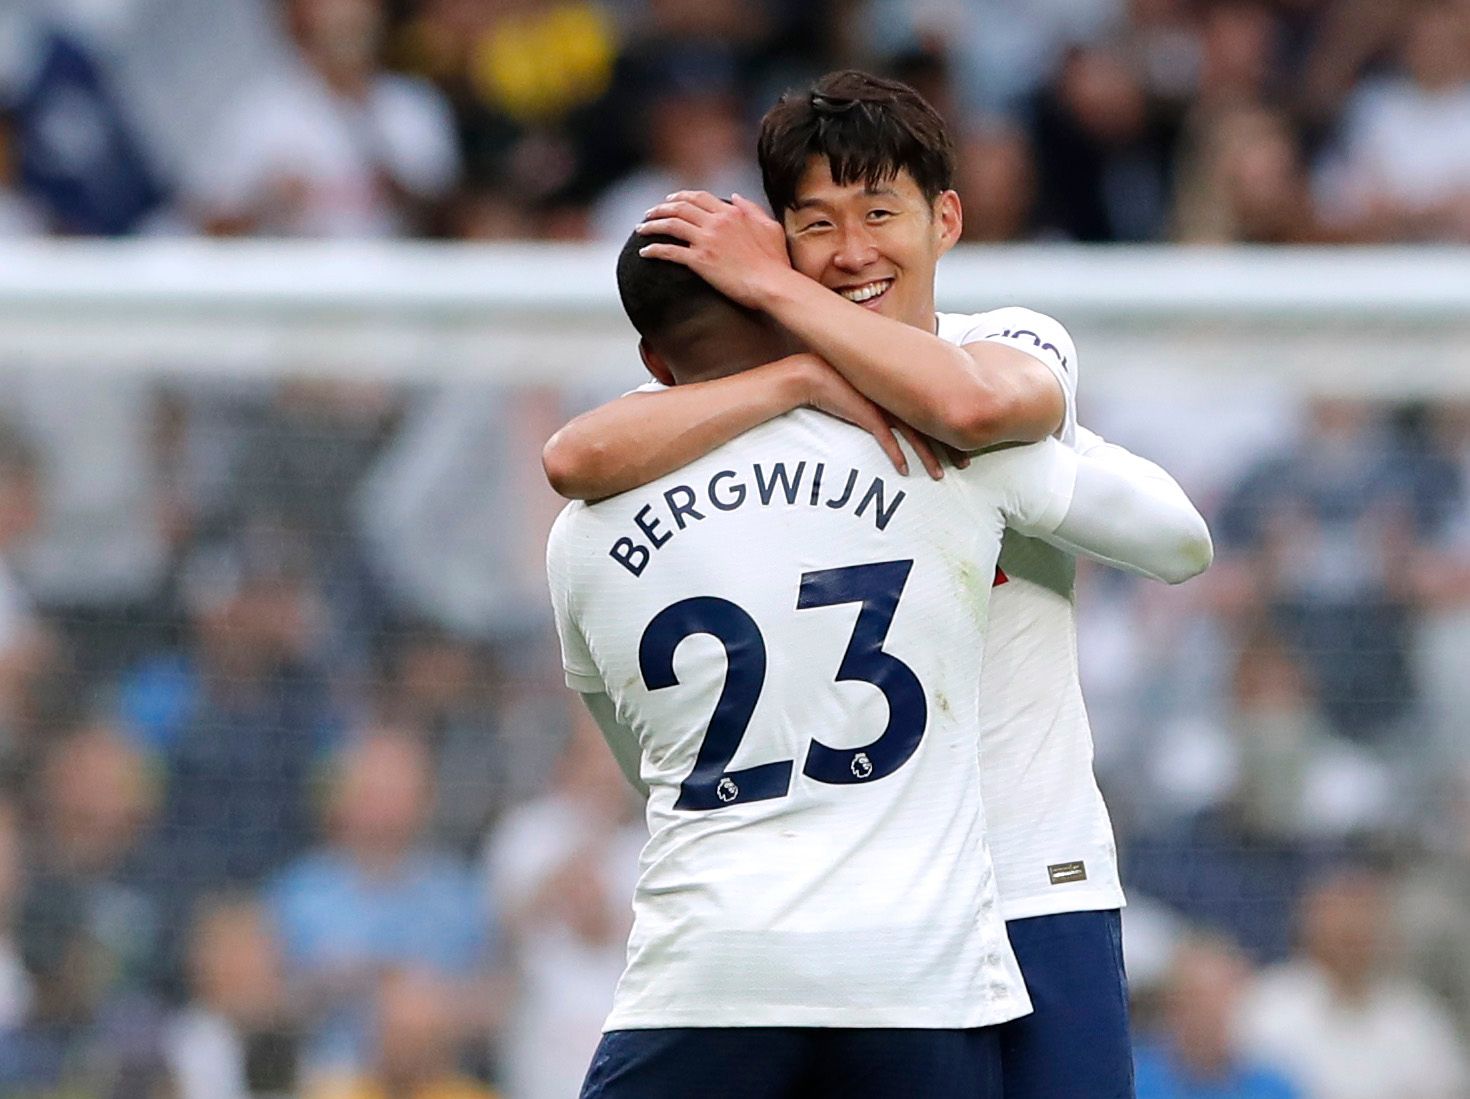 Soccer Football - Premier League - Tottenham Hotspur v Manchester City - Tottenham Hotspur Stadium, London, Britain - August 15, 2021  Tottenham Hotspur's Son Heung-min celebrates with Steven Bergwijn after the match Action Images via Reuters/Andrew Couldridge EDITORIAL USE ONLY. No use with unauthorized audio, video, data, fixture lists, club/league logos or 'live' services. Online in-match use limited to 75 images, no video emulation. No use in betting, games or single club /league/player publ